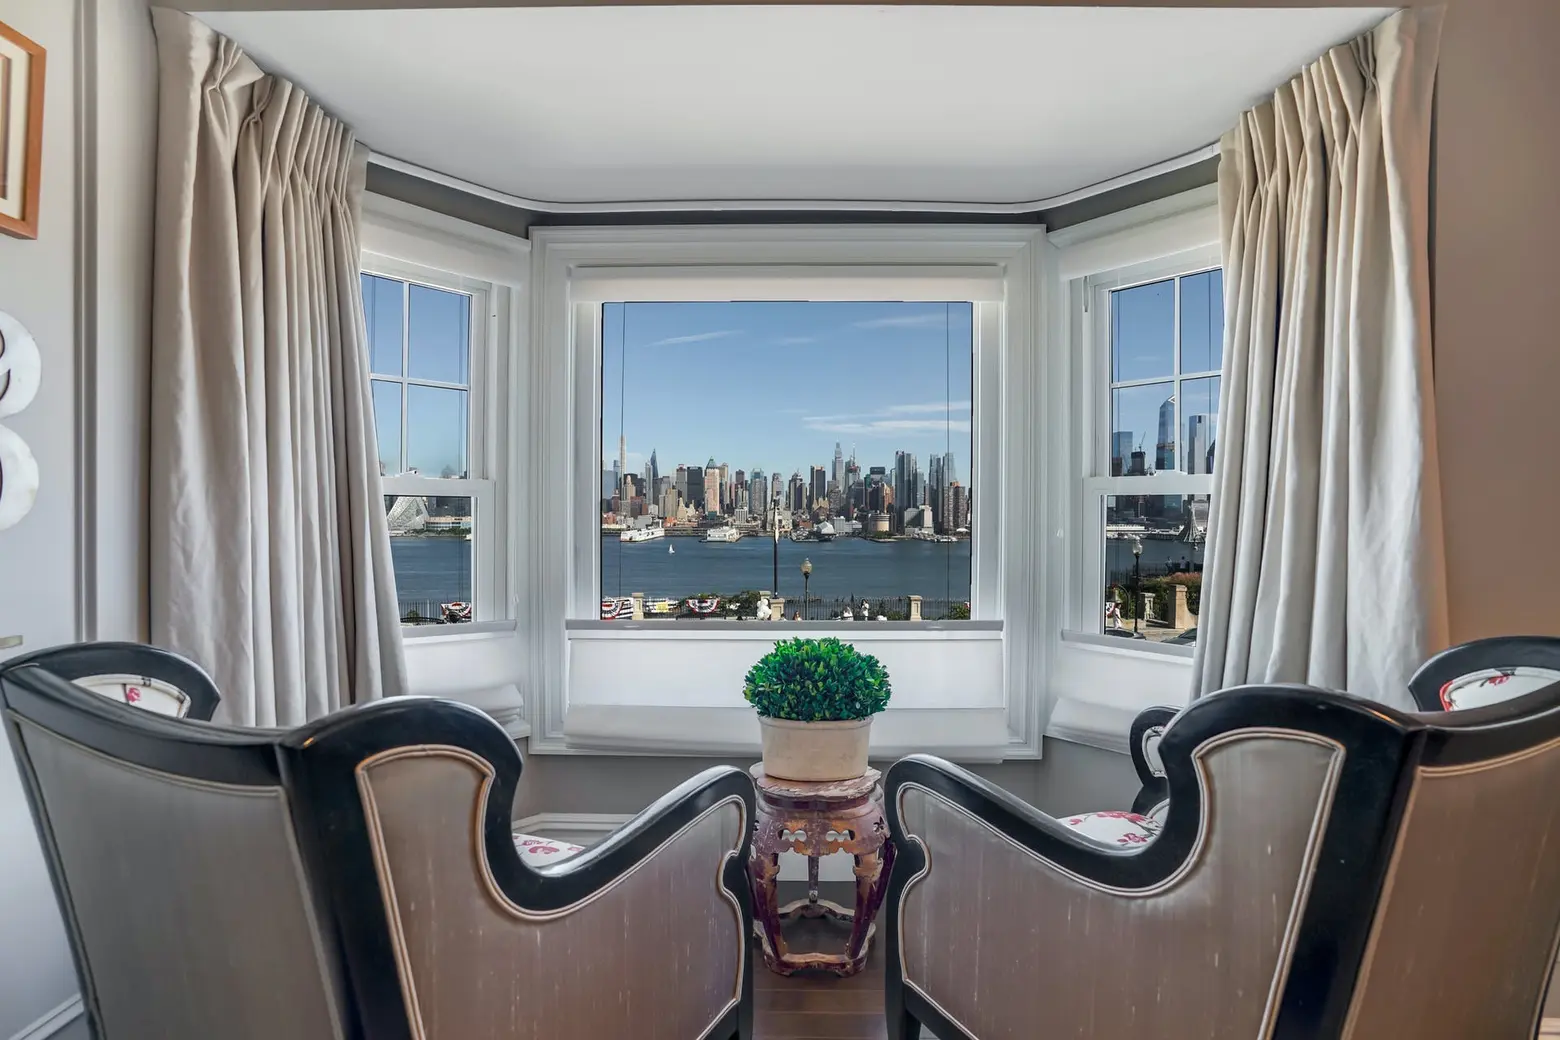 This $3.5M Weehawken home has front-row seats to the NYC skyline